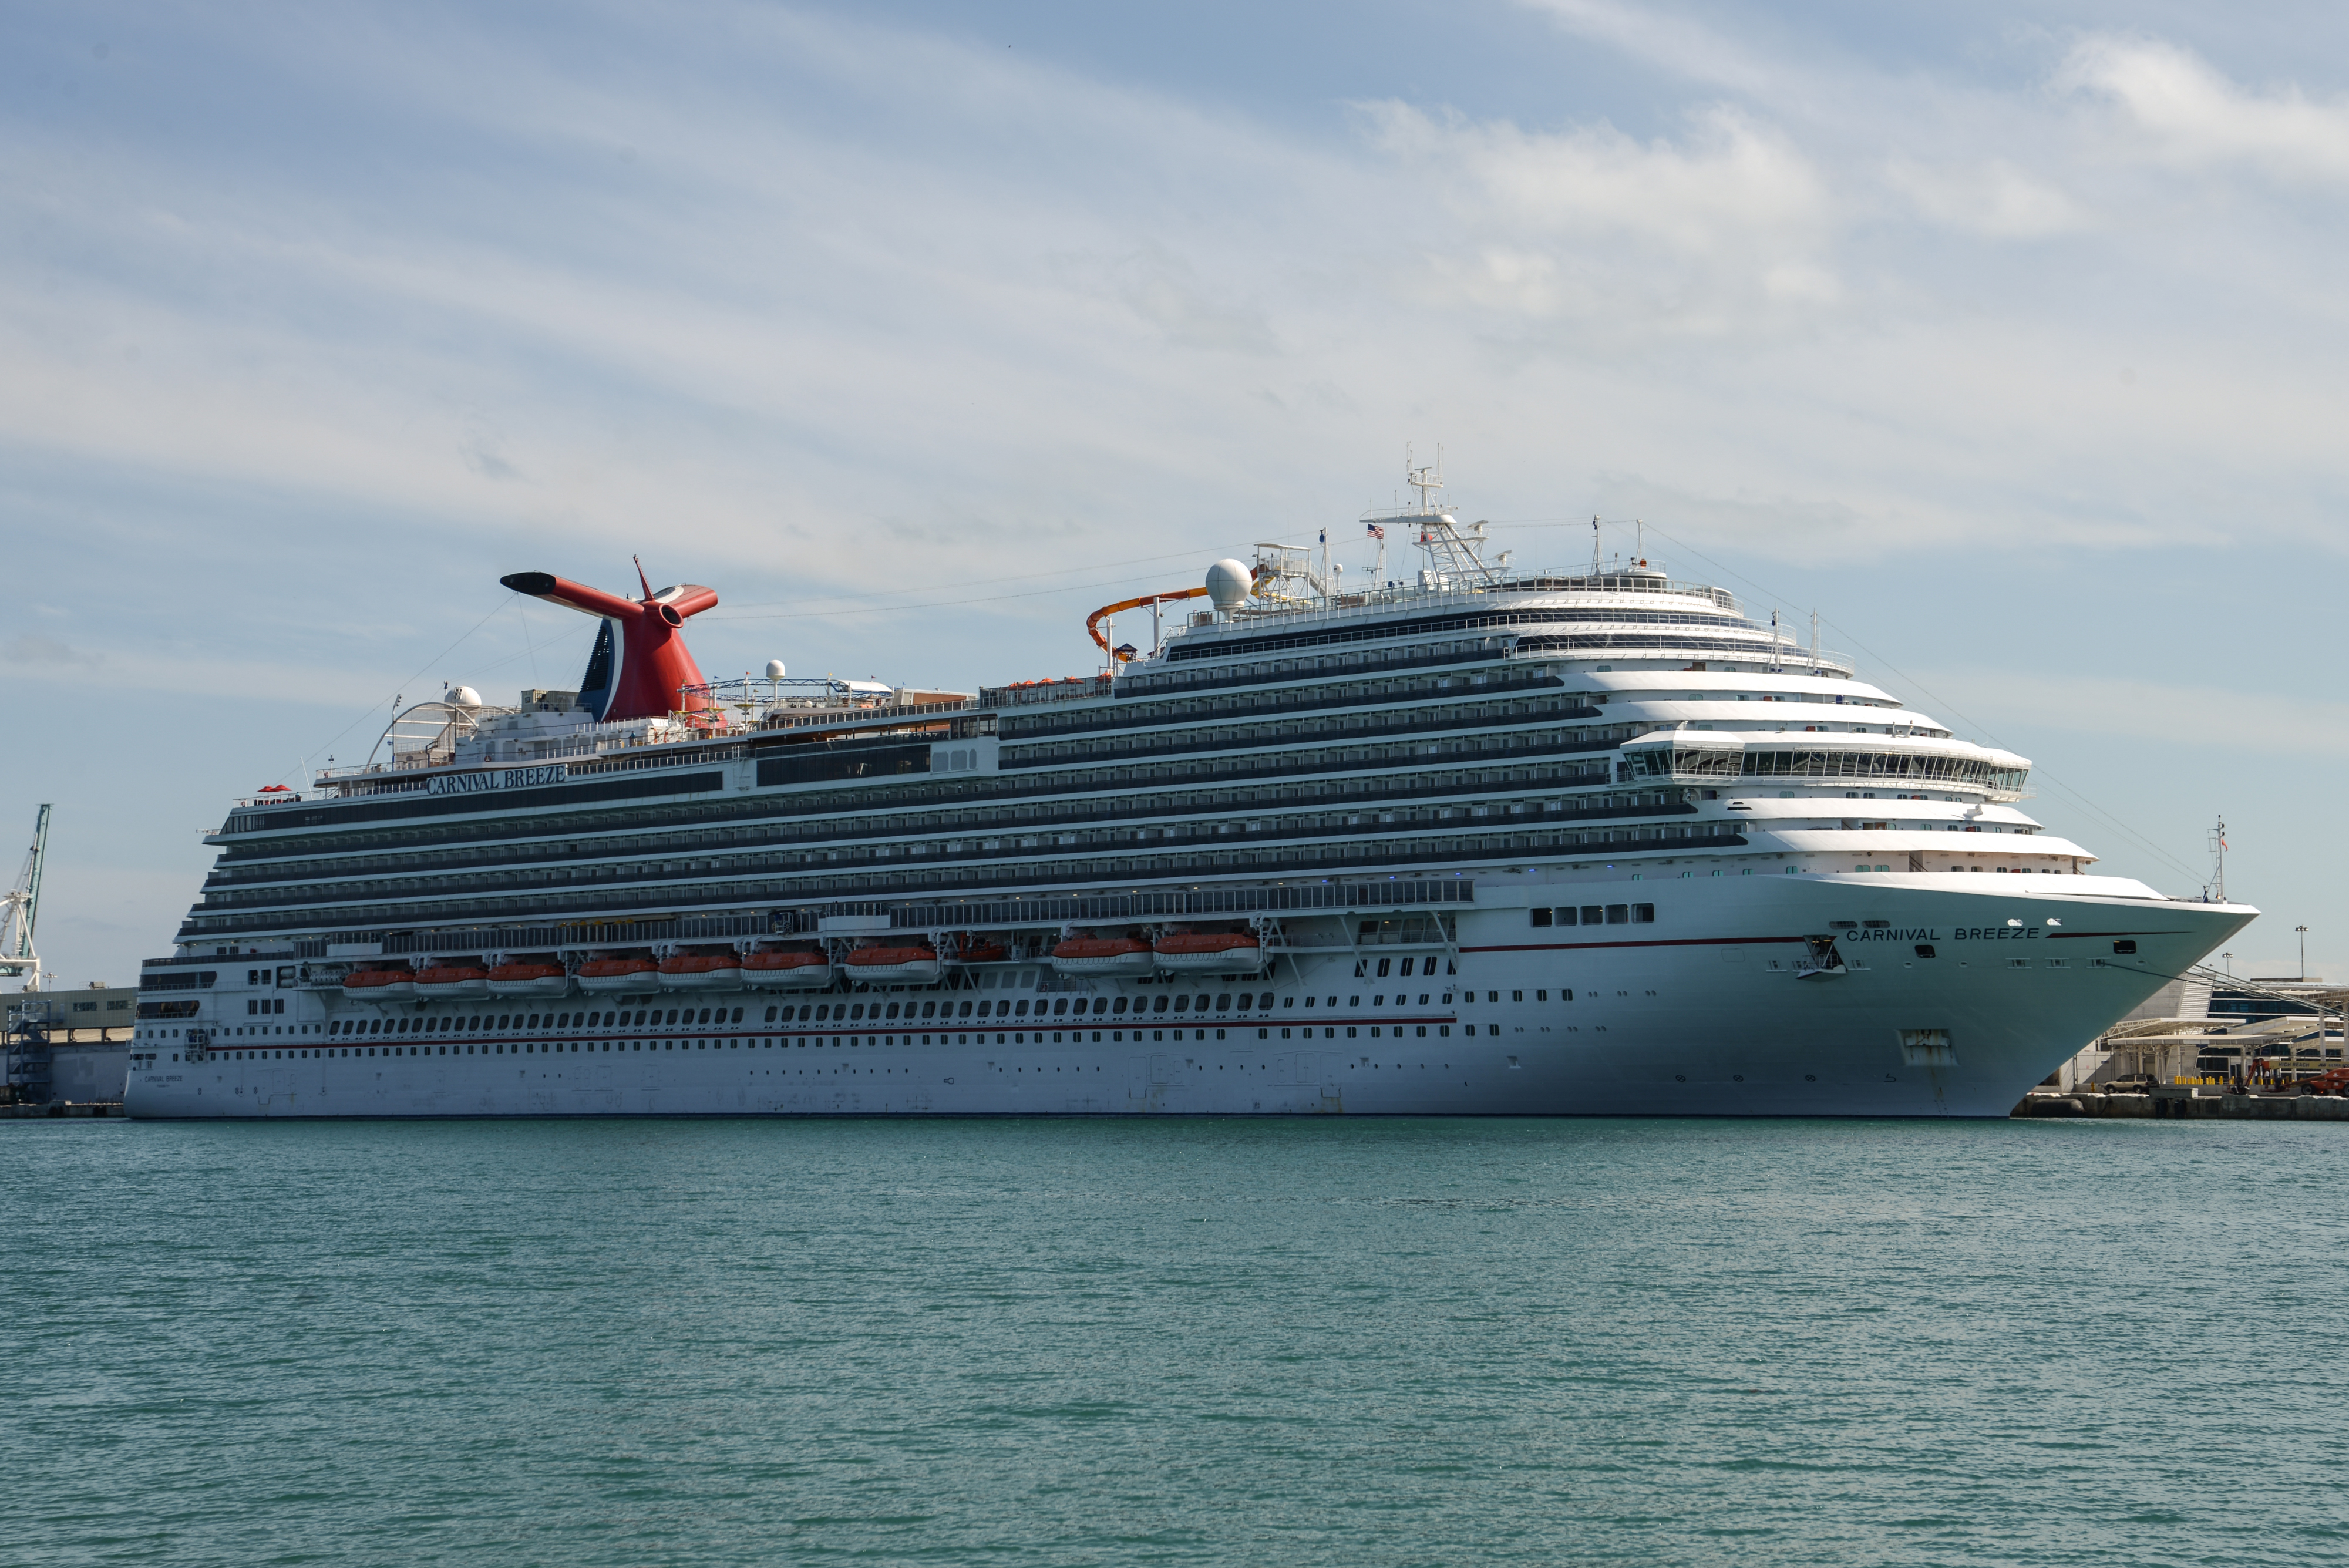 Carnival's Breeze cruise ship stands docked prior to departure in Miami, Florida on March 9, 2014.